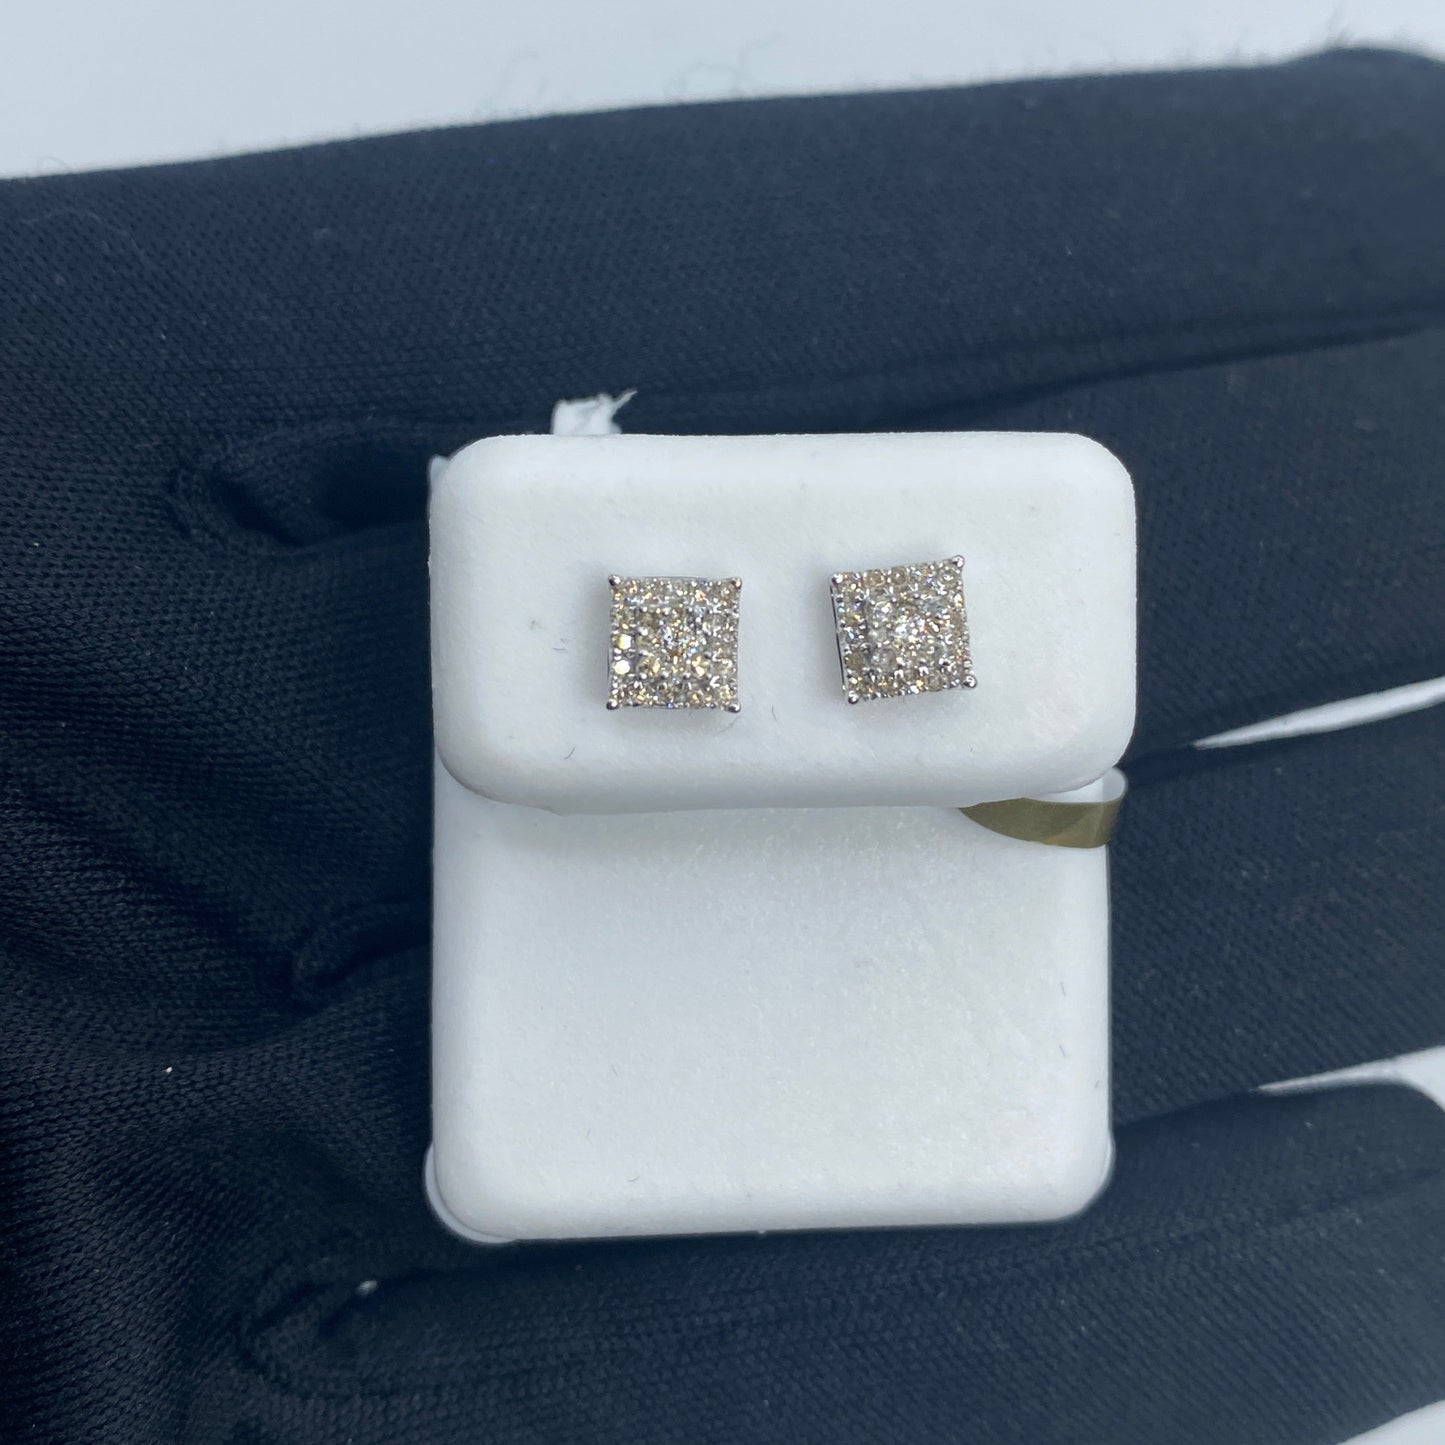 10K Square Gold and Diamond Earrings